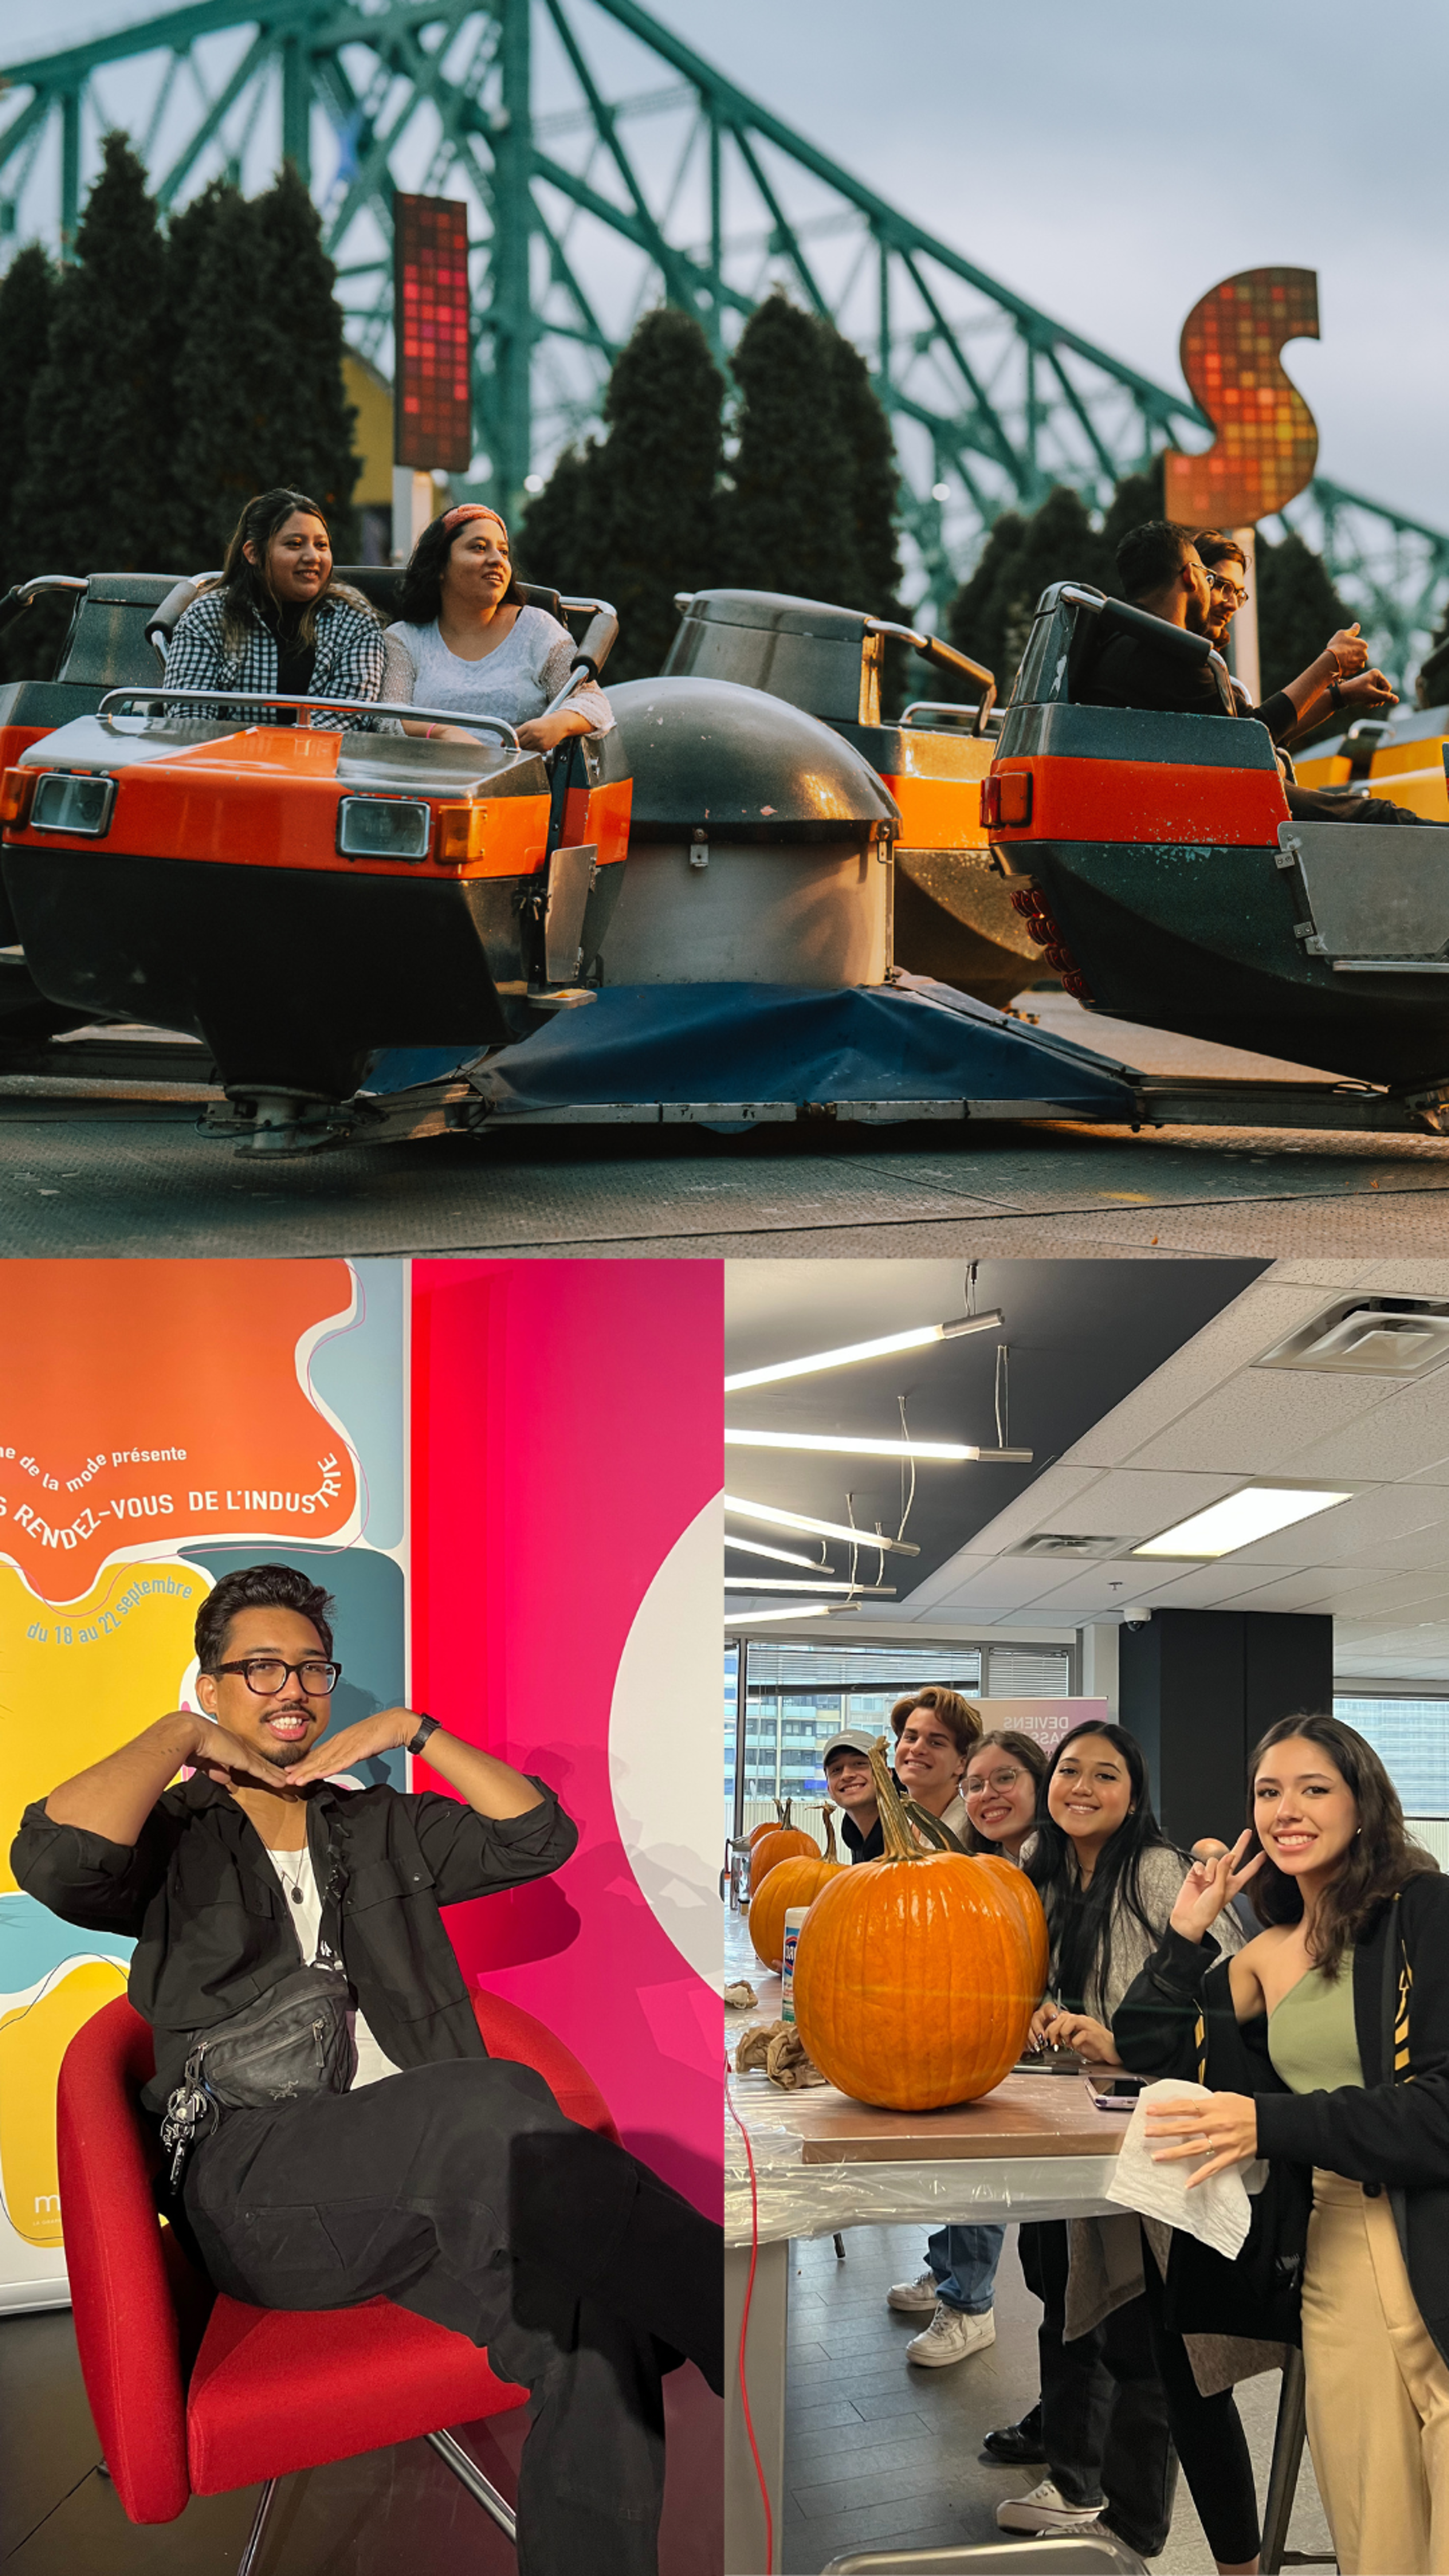 Collage of joyful moments: friends on bumper cars at dusk, an individual enjoying a colorful workspace, and people carving a pumpkin together.